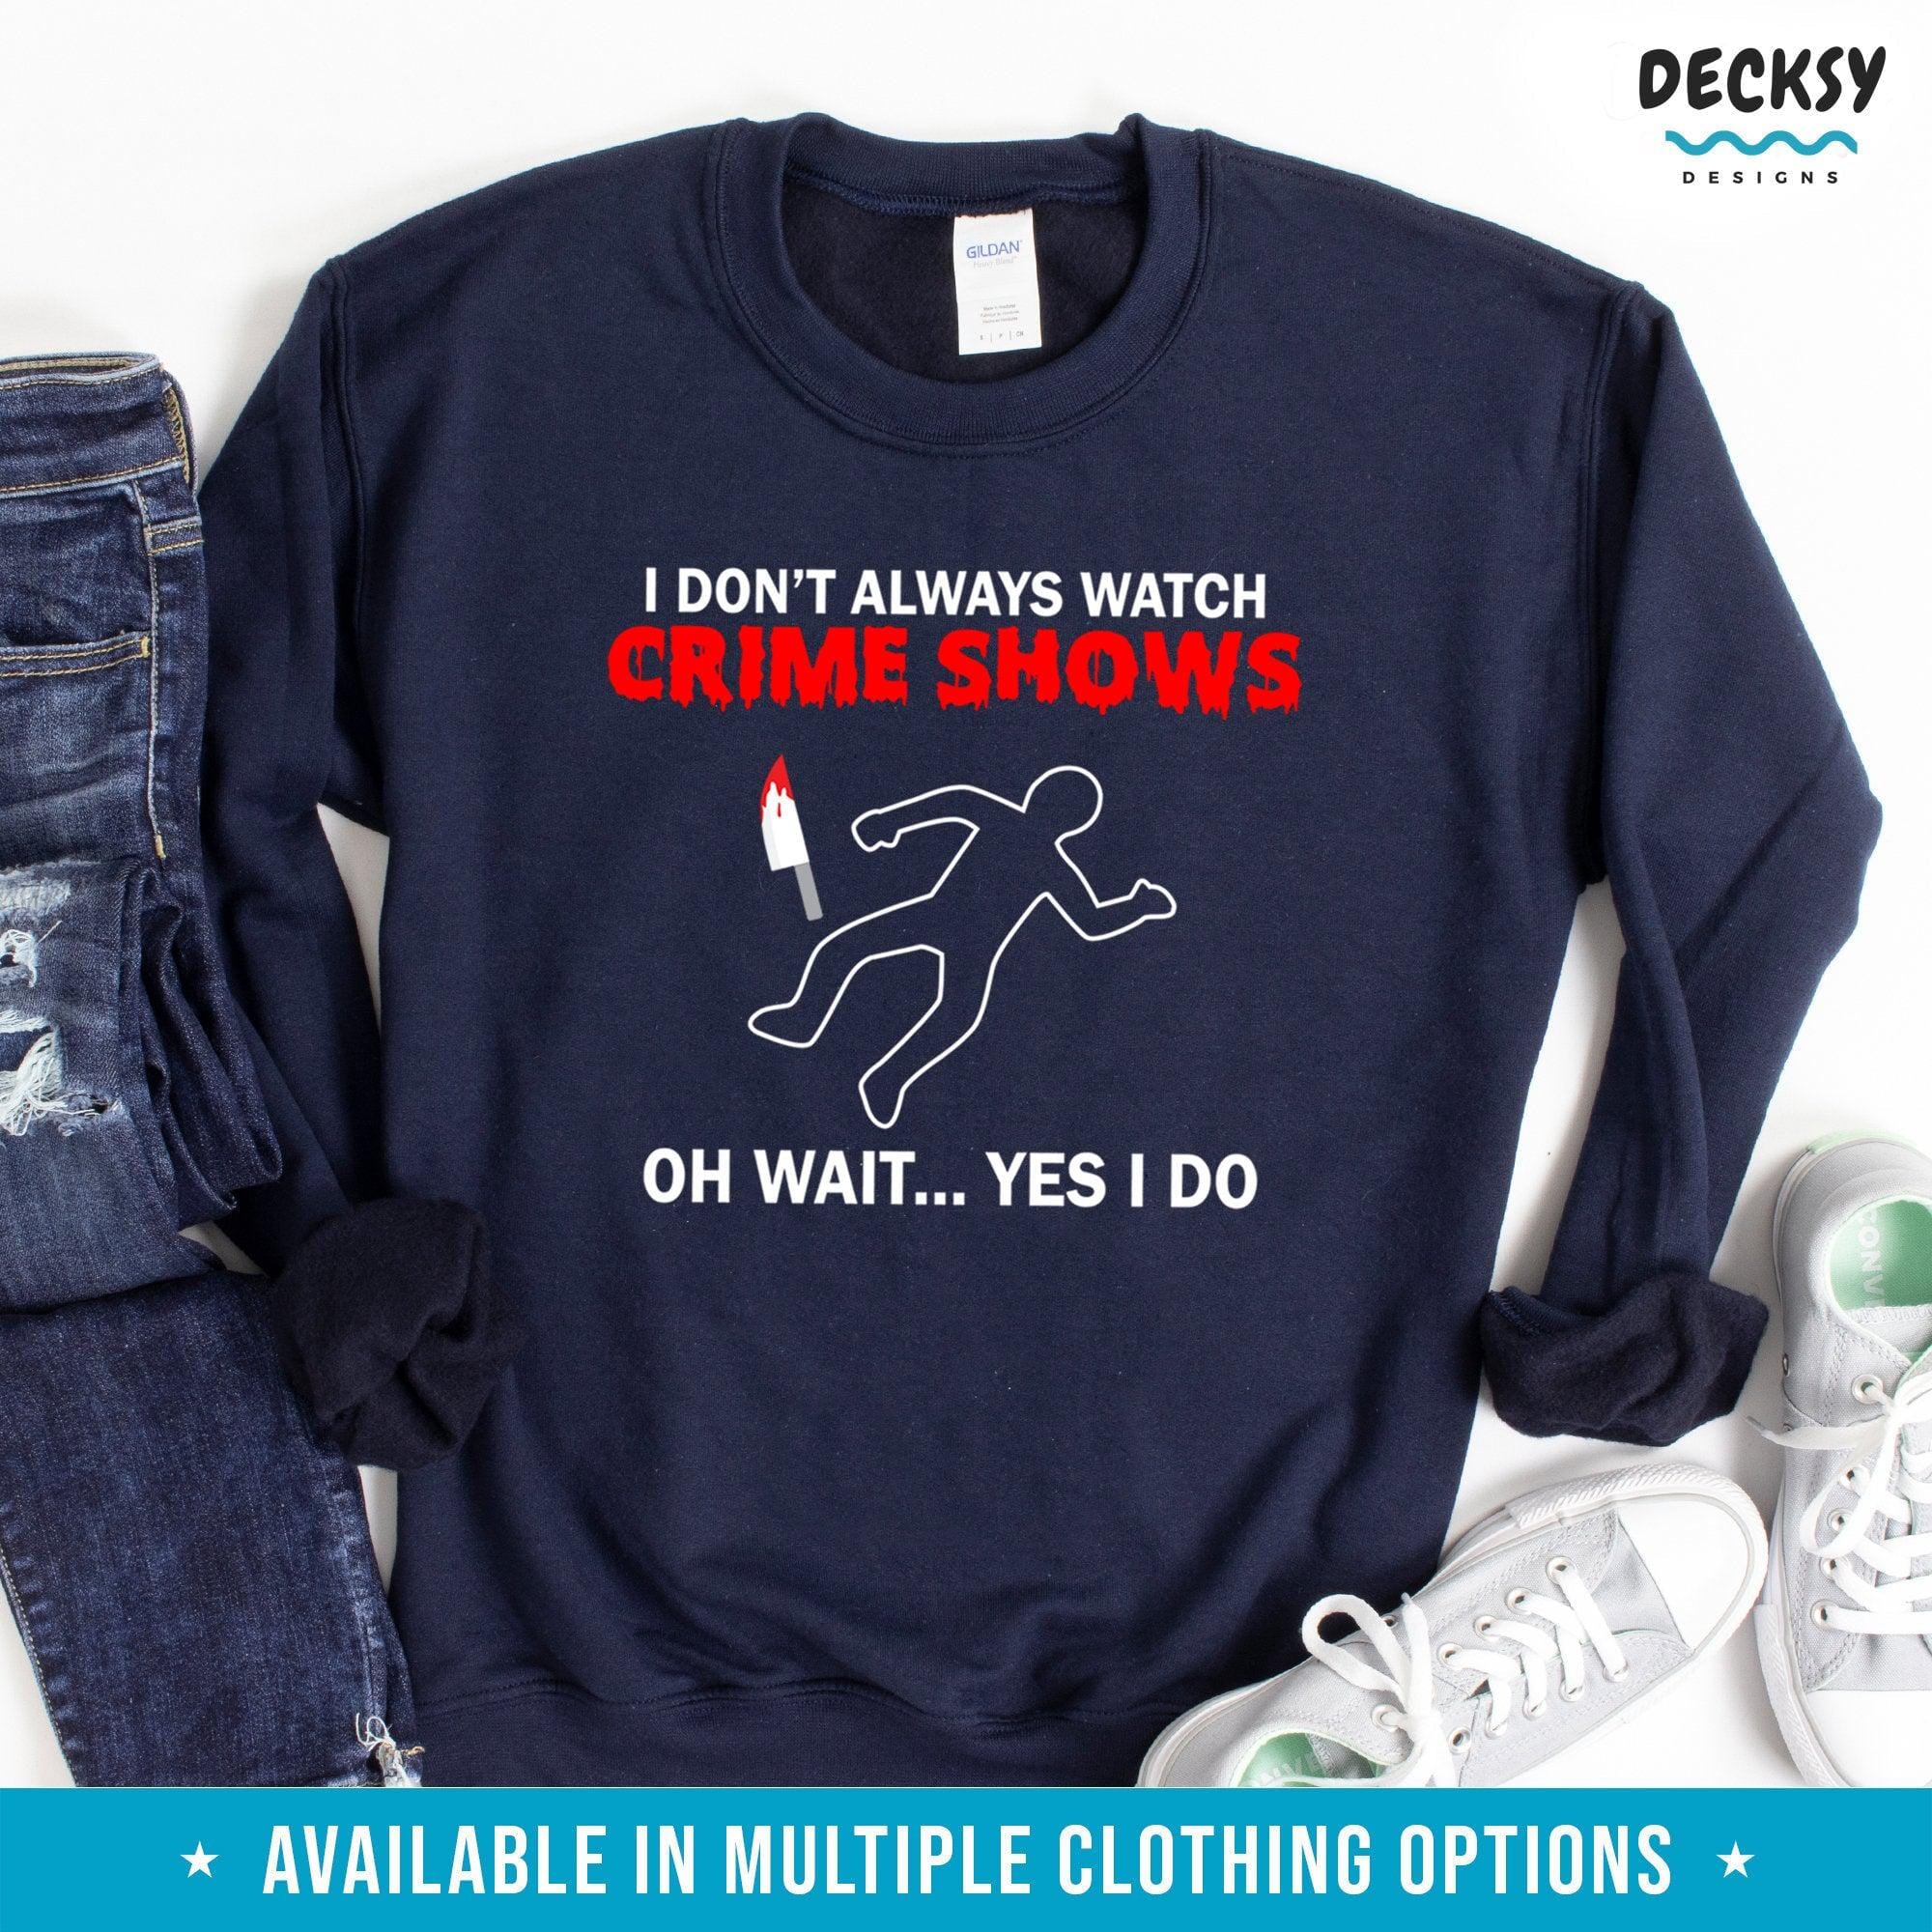 True Crime Shirt, Binge Watching Gift-Clothing:Gender-Neutral Adult Clothing:Tops & Tees:T-shirts:Graphic Tees-DecksyDesigns